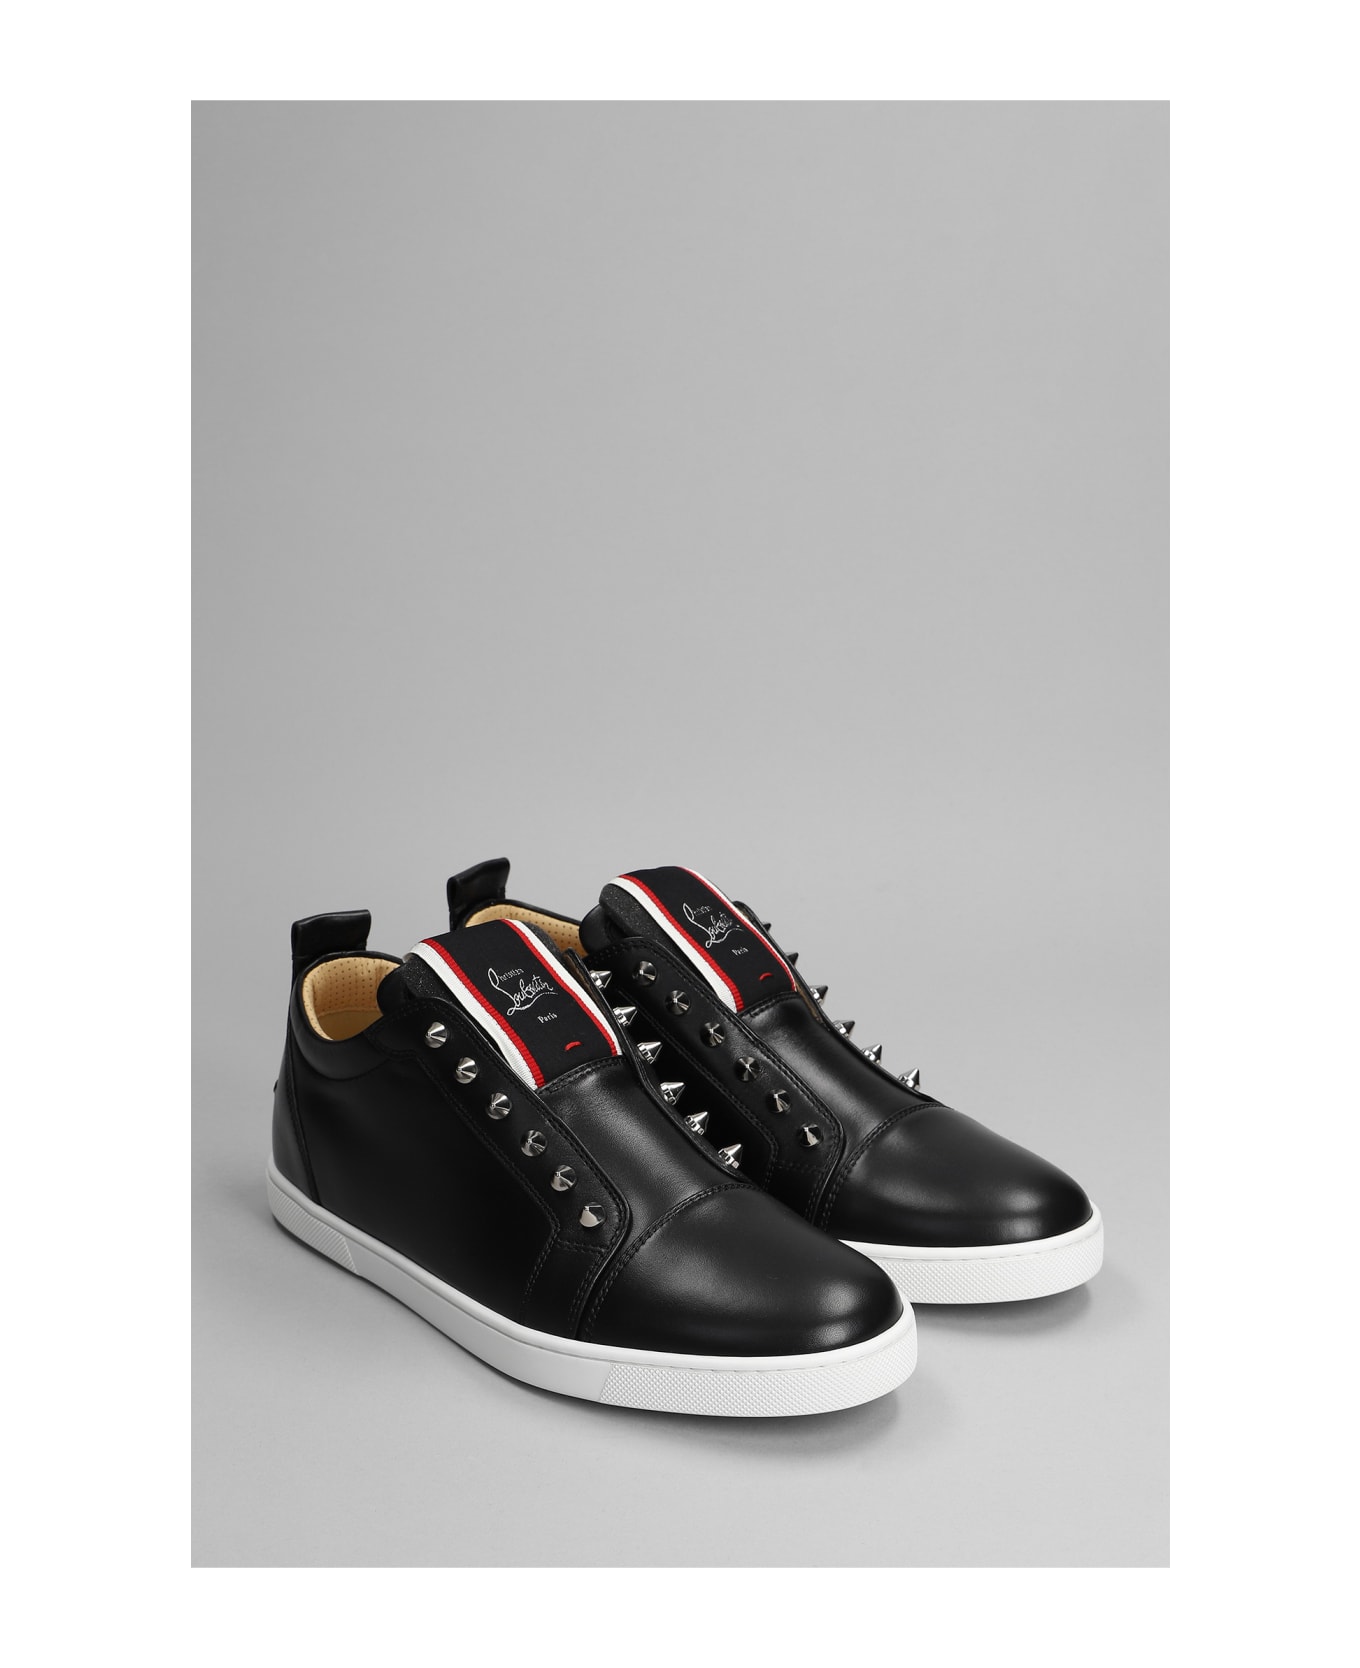 Christian Louboutin F.a.v. Fique Sneakers In Black Leather - black